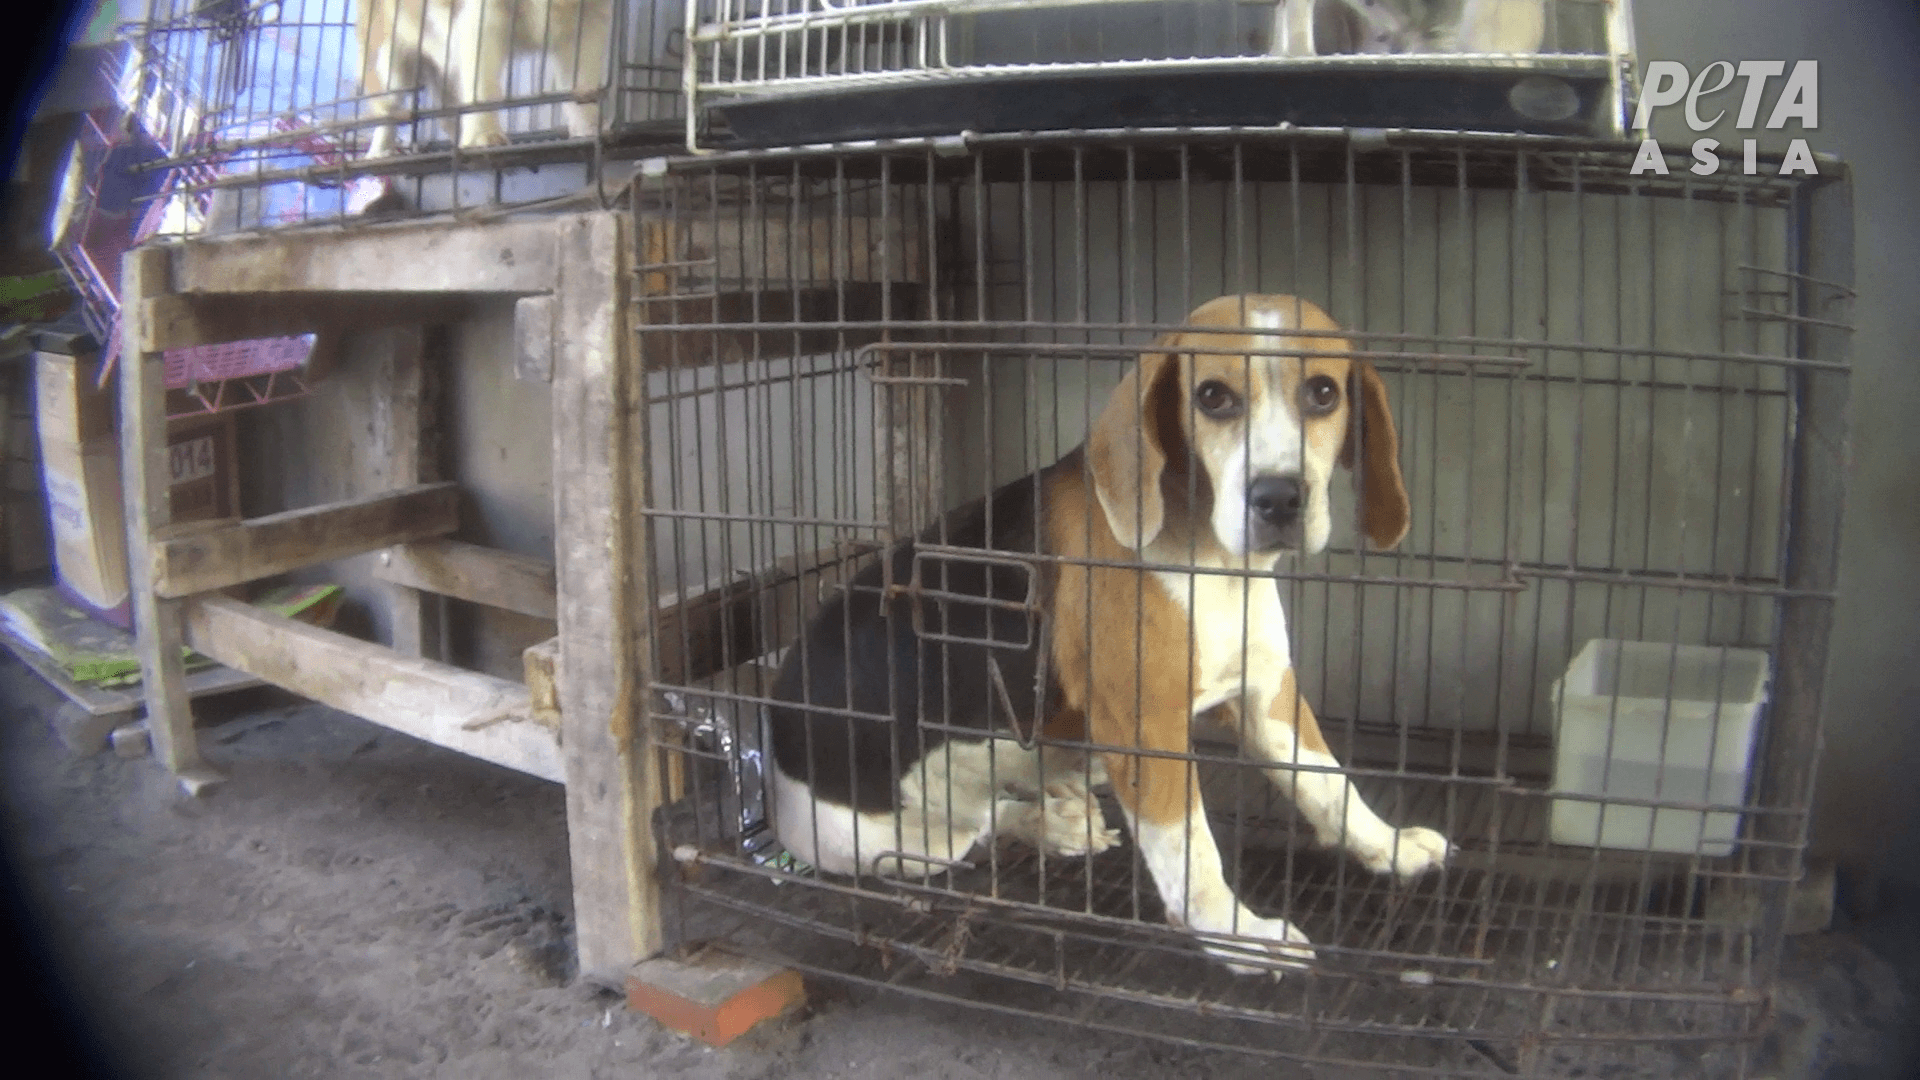 Dogs+in+cages+1 PETA Exposes Abuse in Indonesian Puppy Mills—Take Action!